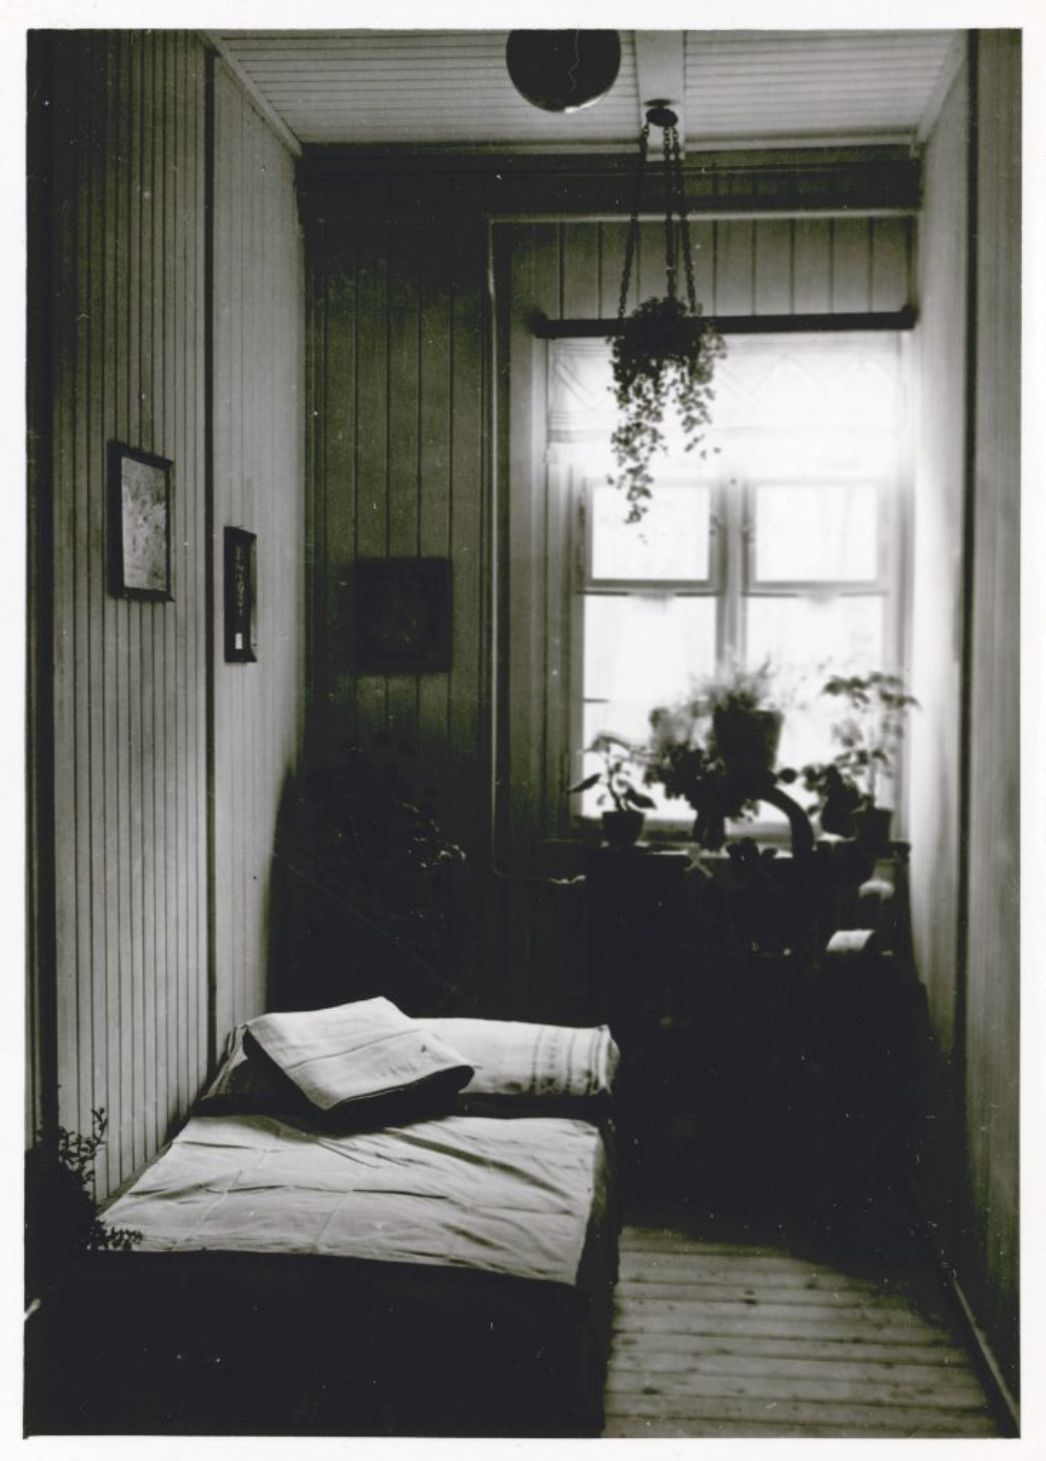 View into one of the sleeping rooms of the camp shelf. On the left is a padded sleeping cot. Small pictures hang on the wall. In the back you can see a window with a plant arrangement in front of it. Above the window is a hanging plant in a pot that is attached to the ceiling.View into one of the sleeping rooms of the camp shelf. On the left is a padded sleeping cot. Small pictures hang on the wall. In the back you can see a window with a plant arrangement in front of it. Above the window is a hanging plant in a pot that is attached to the ceiling.